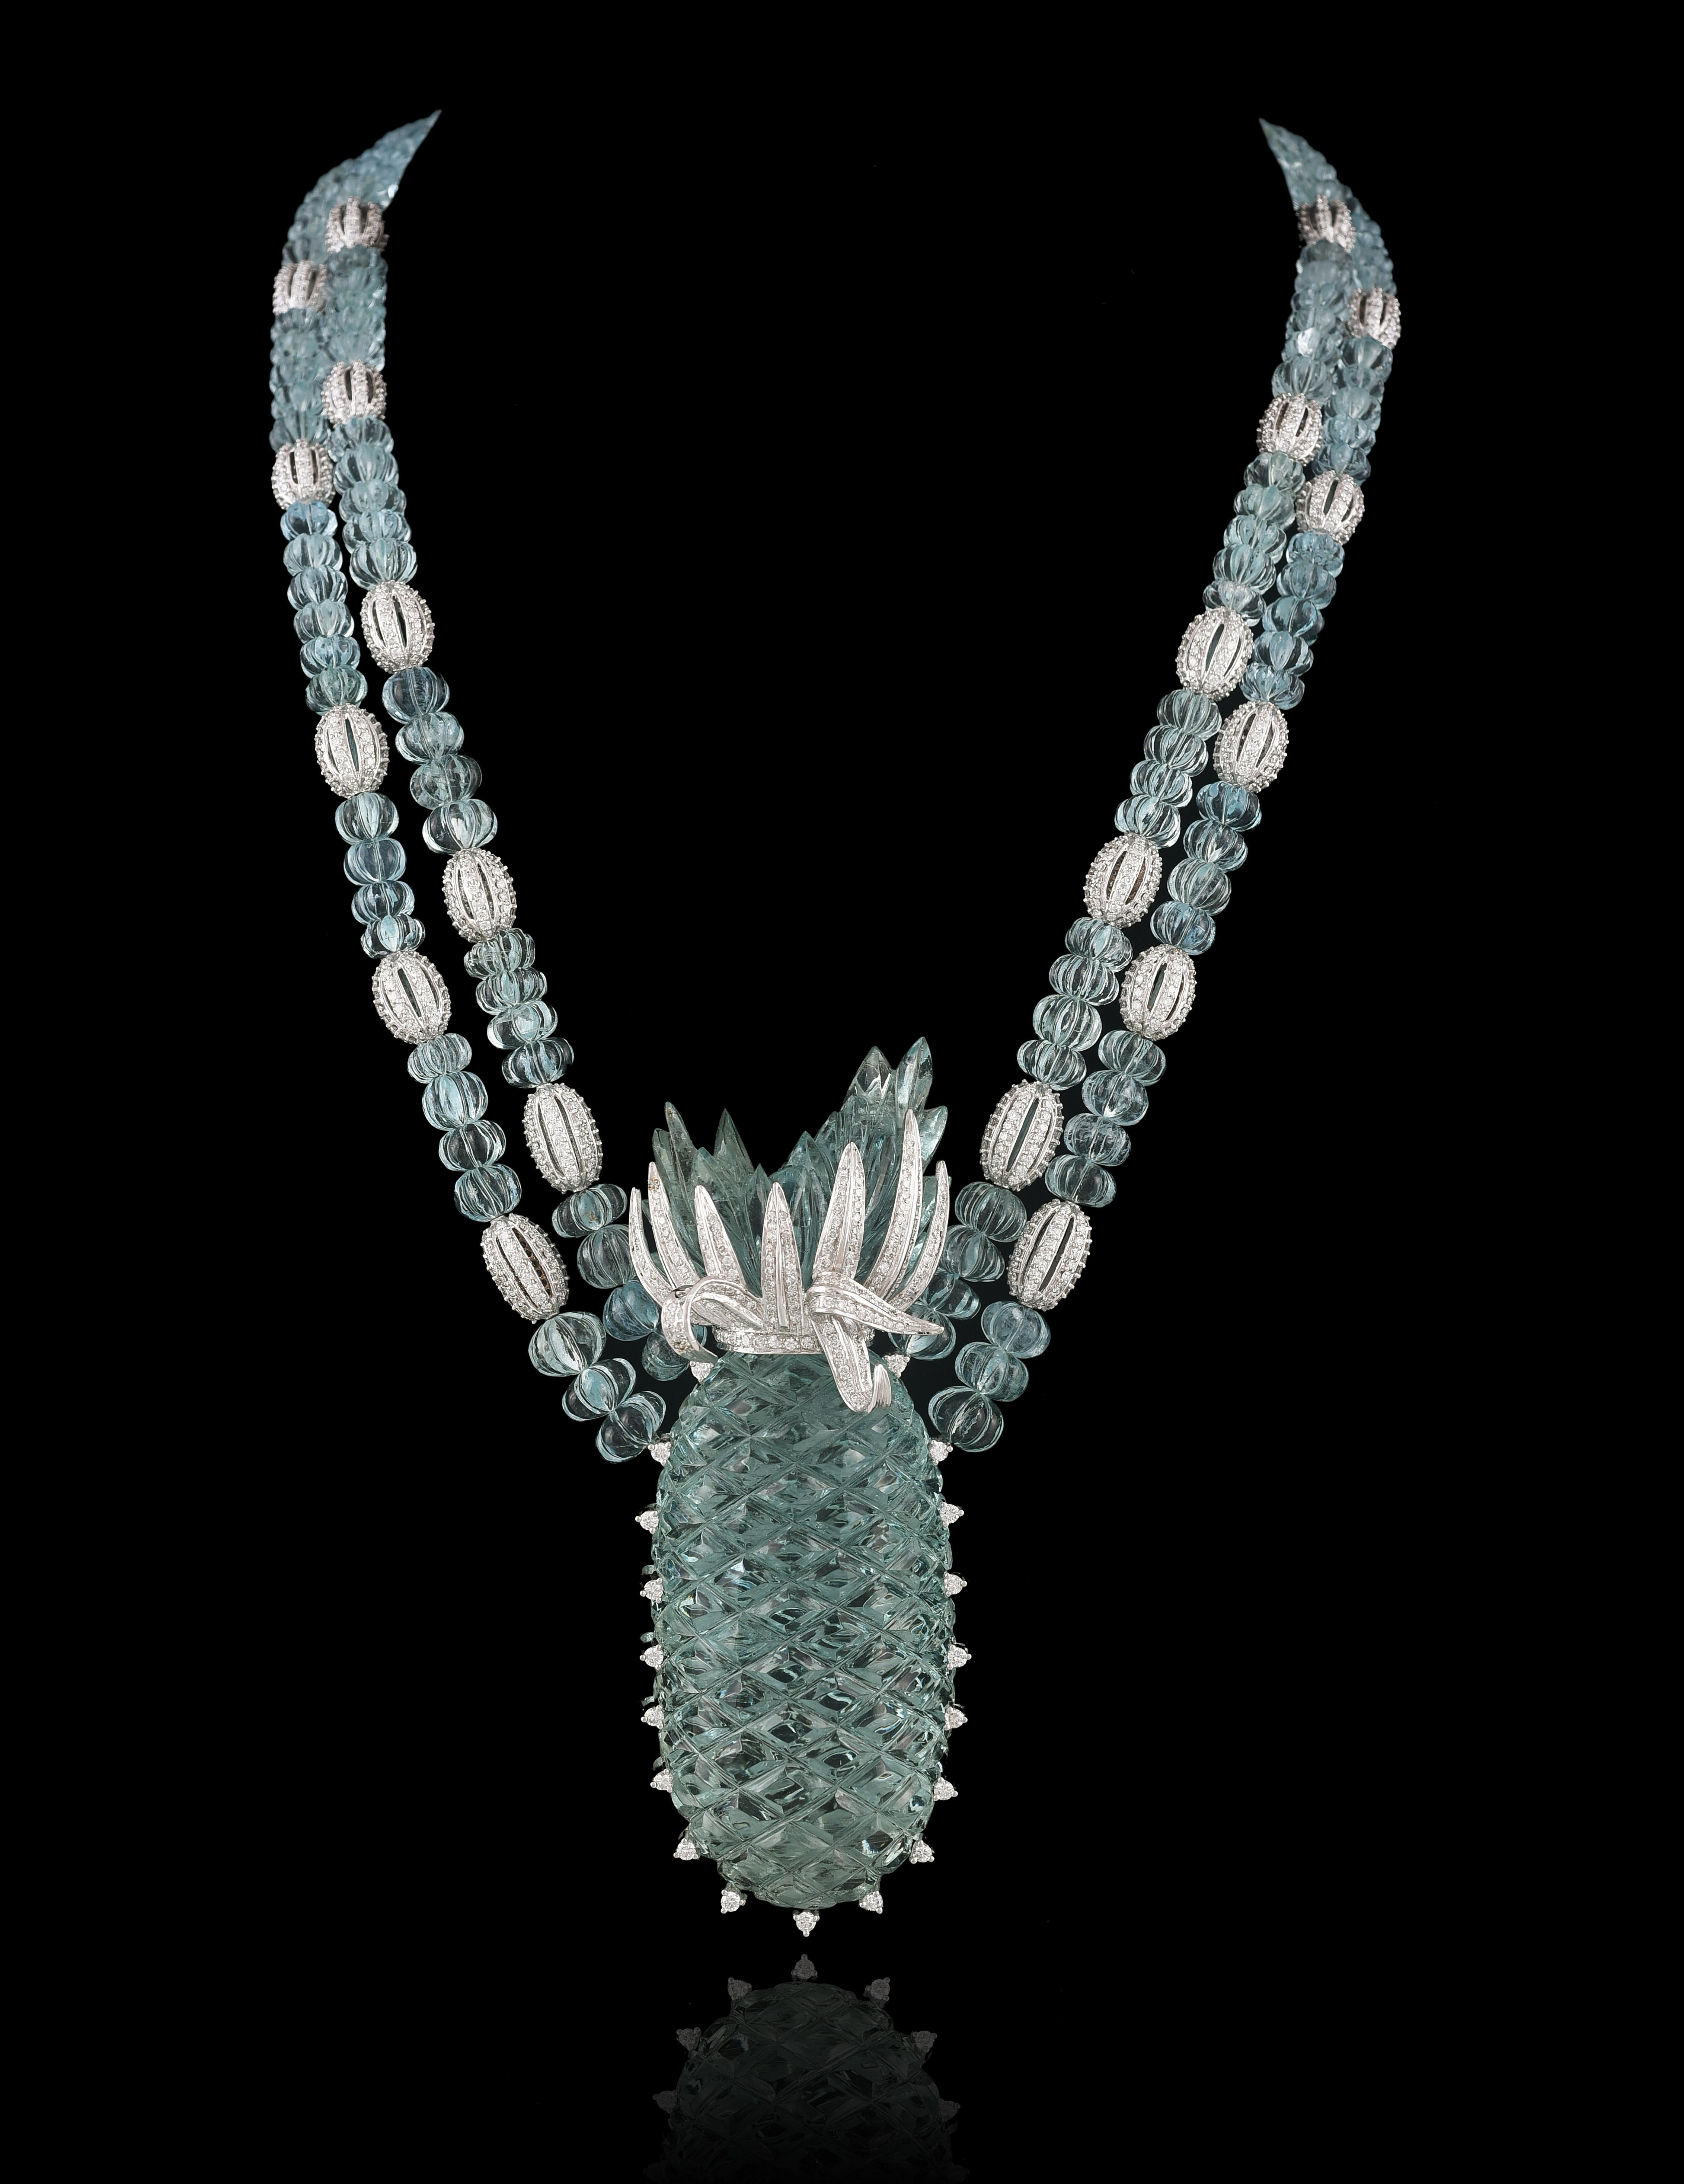 A one of the kind, hand - carved, Aquamarine beads and Pineapple carved Multi Strand Pendant Necklace set in 18K White Gold and Diamonds. All the Aquamarine is natural, hand - carved in our very own workshop and therefore guaranteeing authencity of